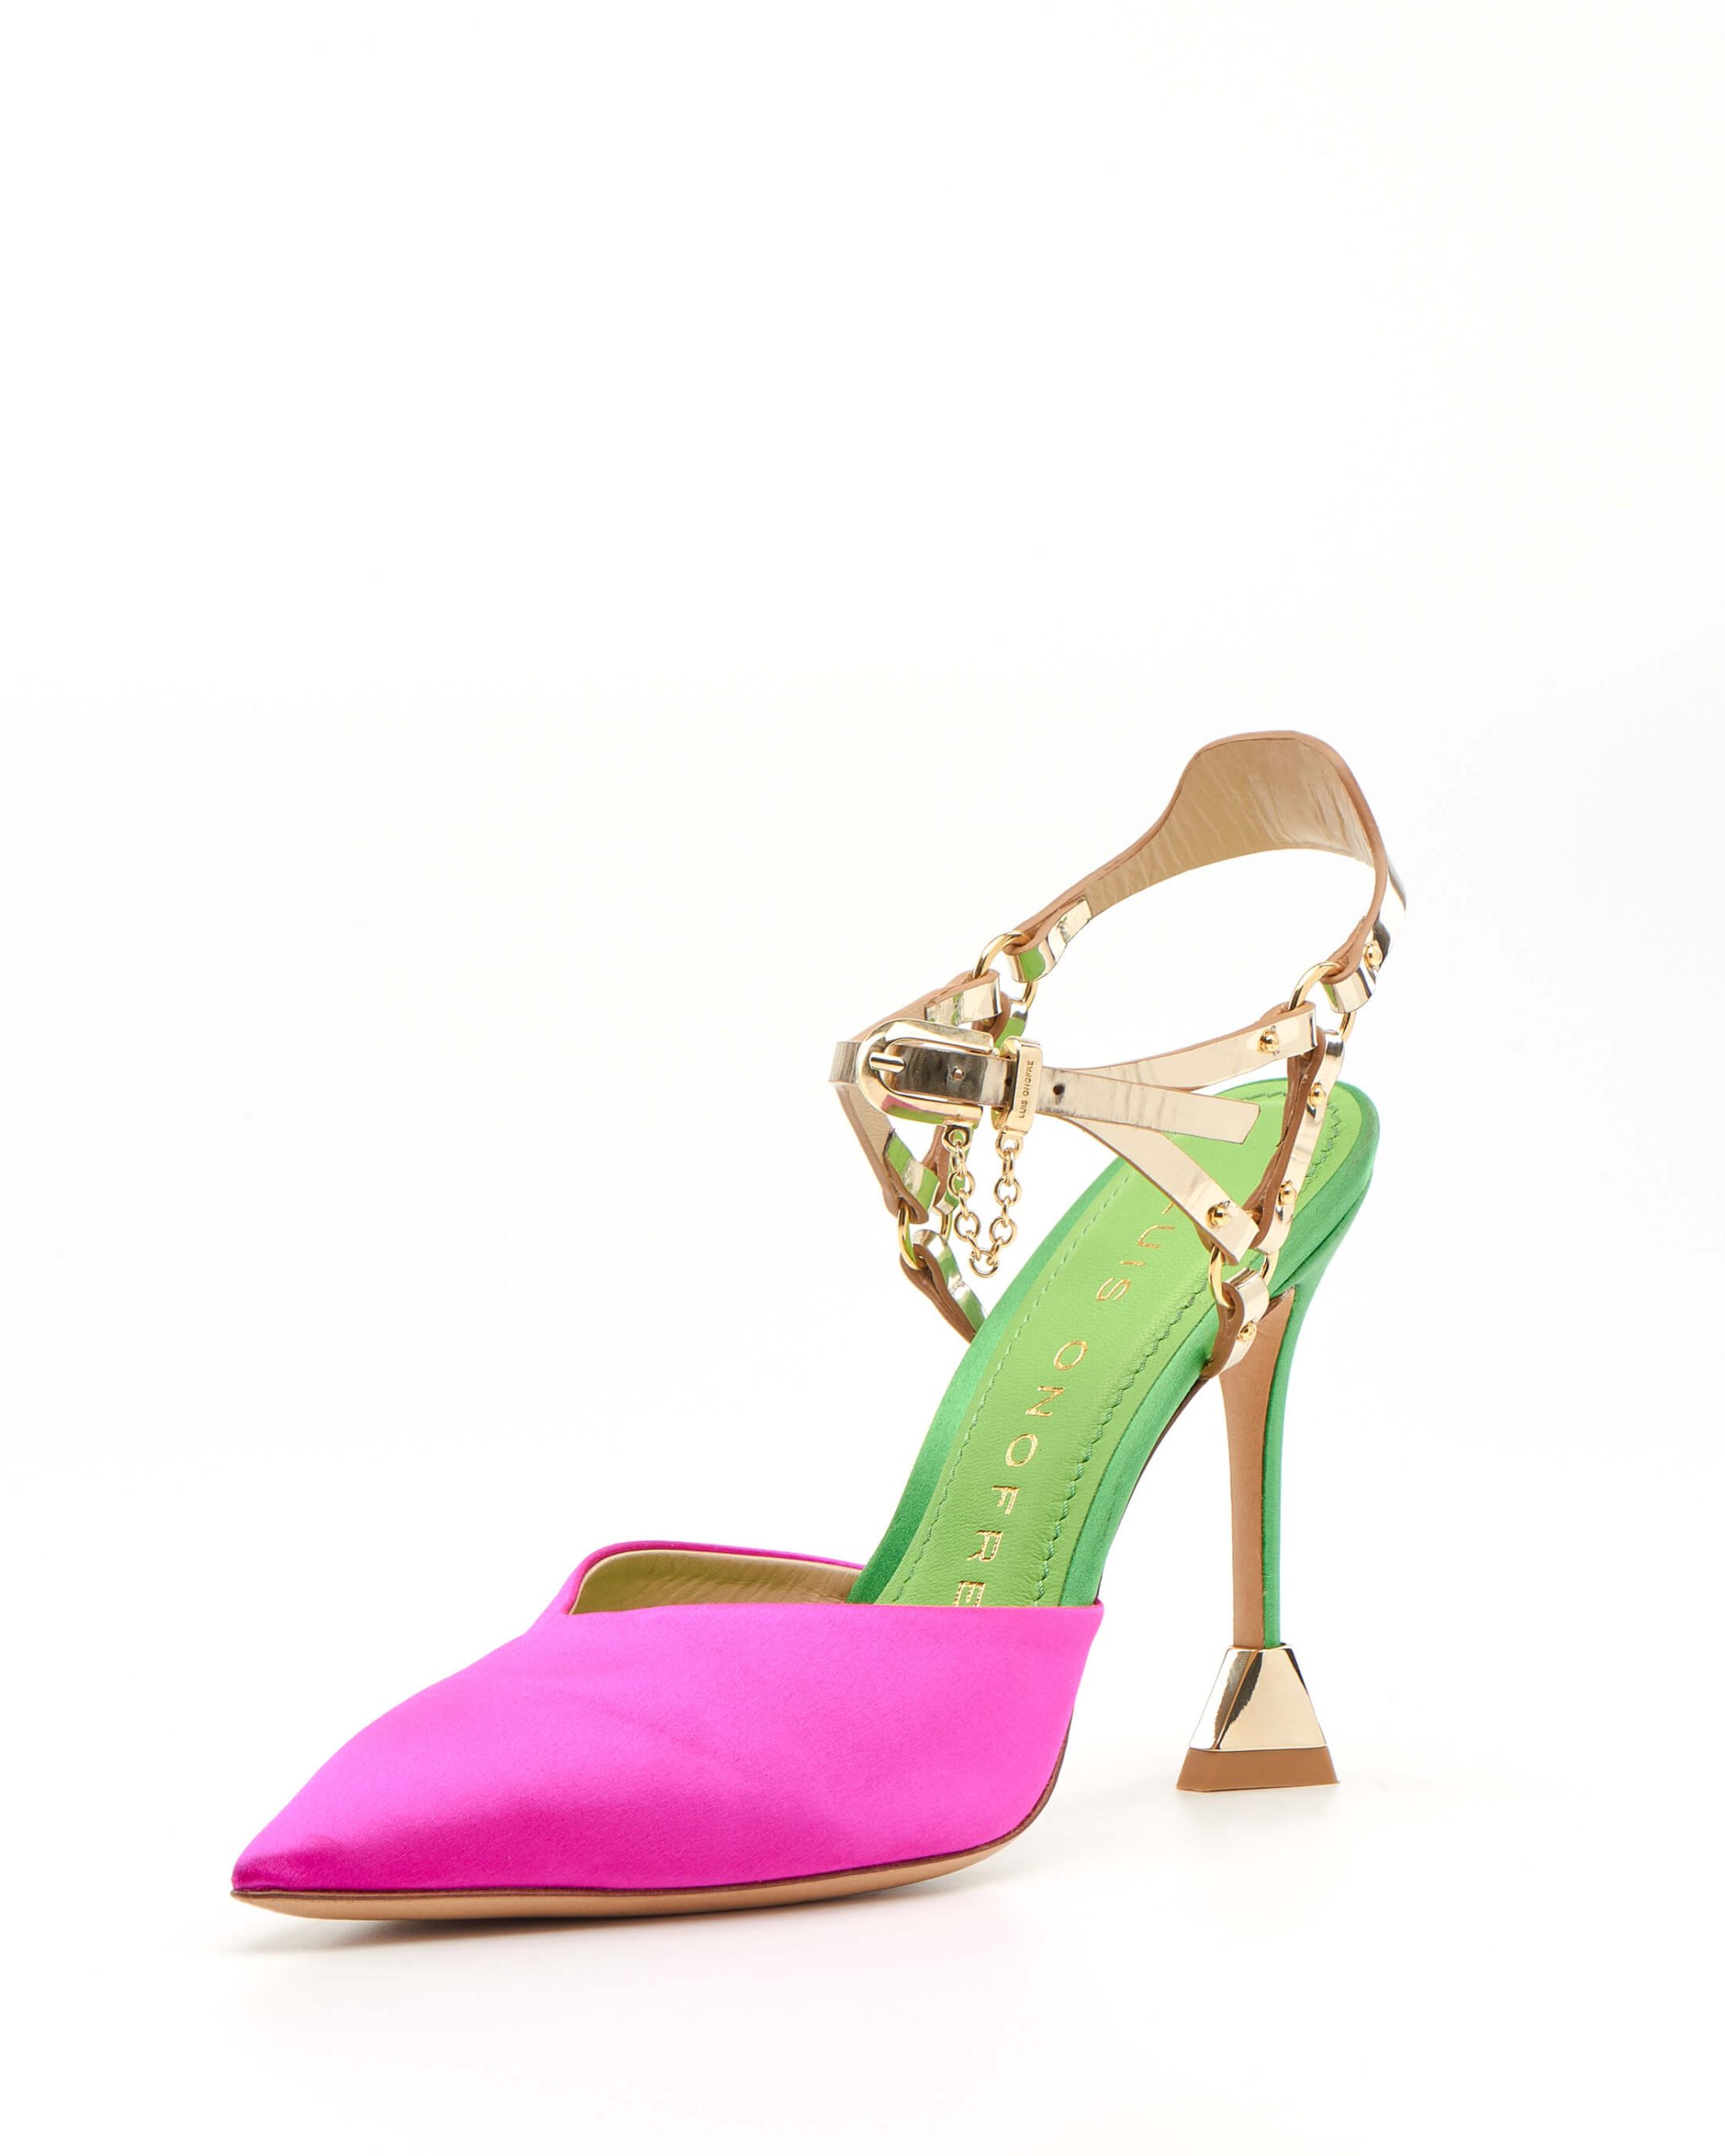 Luis Onofre Portuguese Shoes FW22 – 5373_01MF – Hades pink and green-2